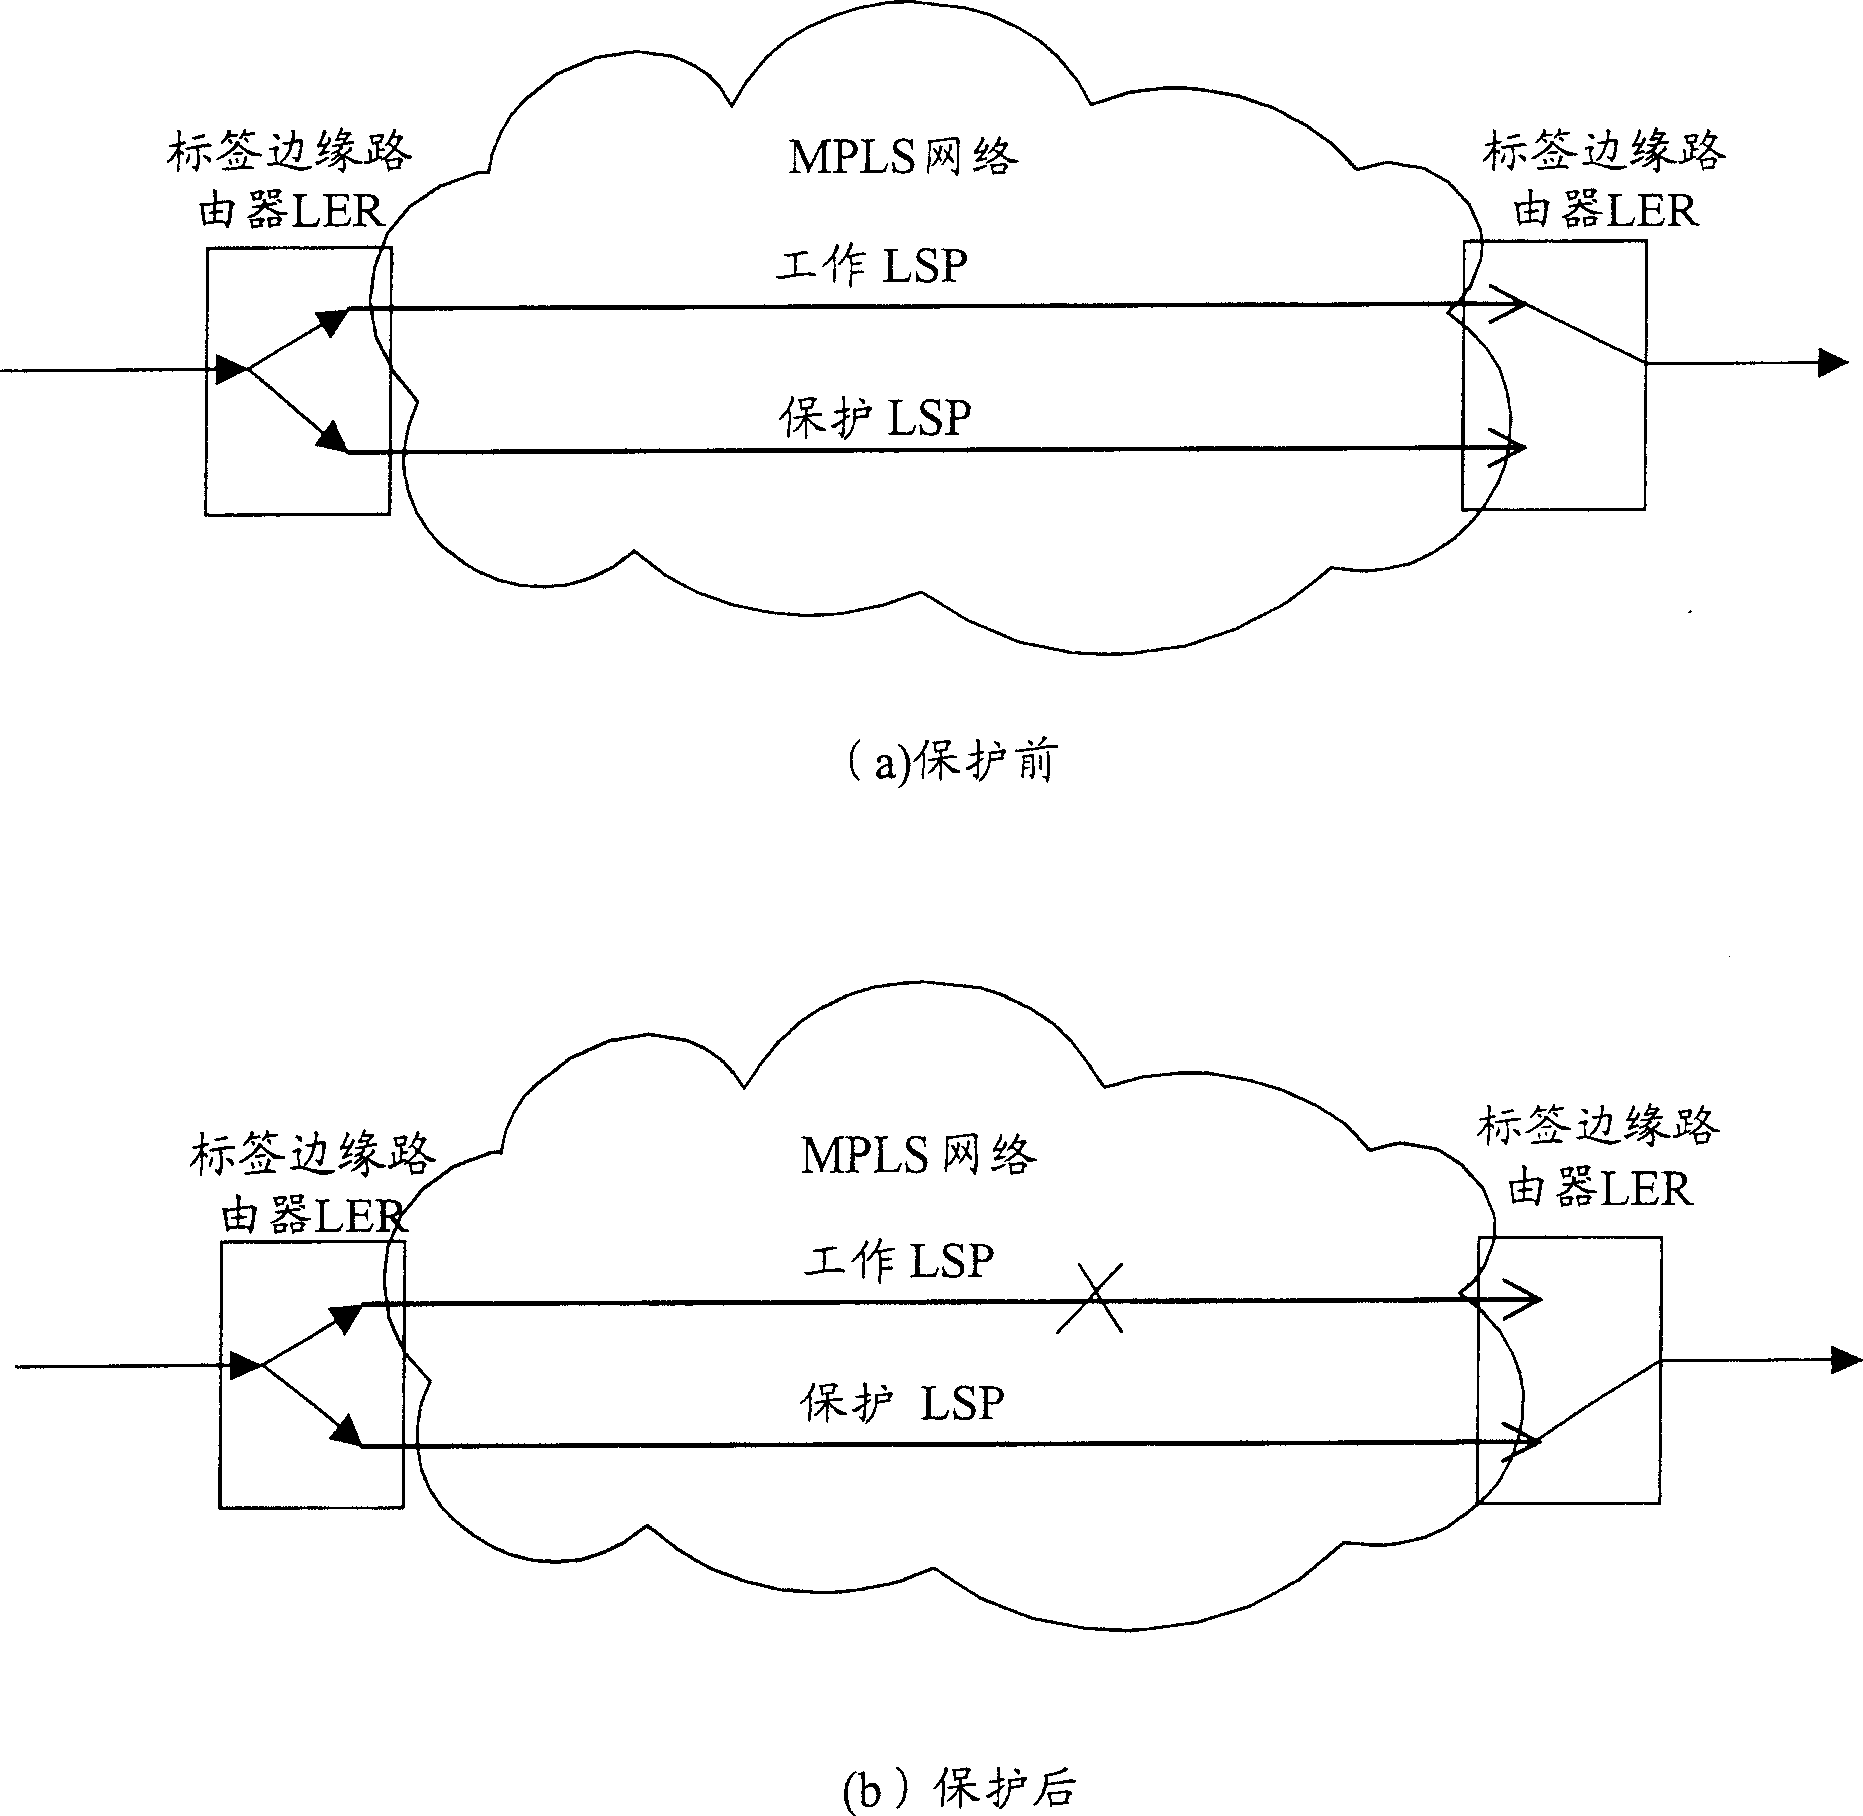 Protection switching method in multiprotocol label switching system